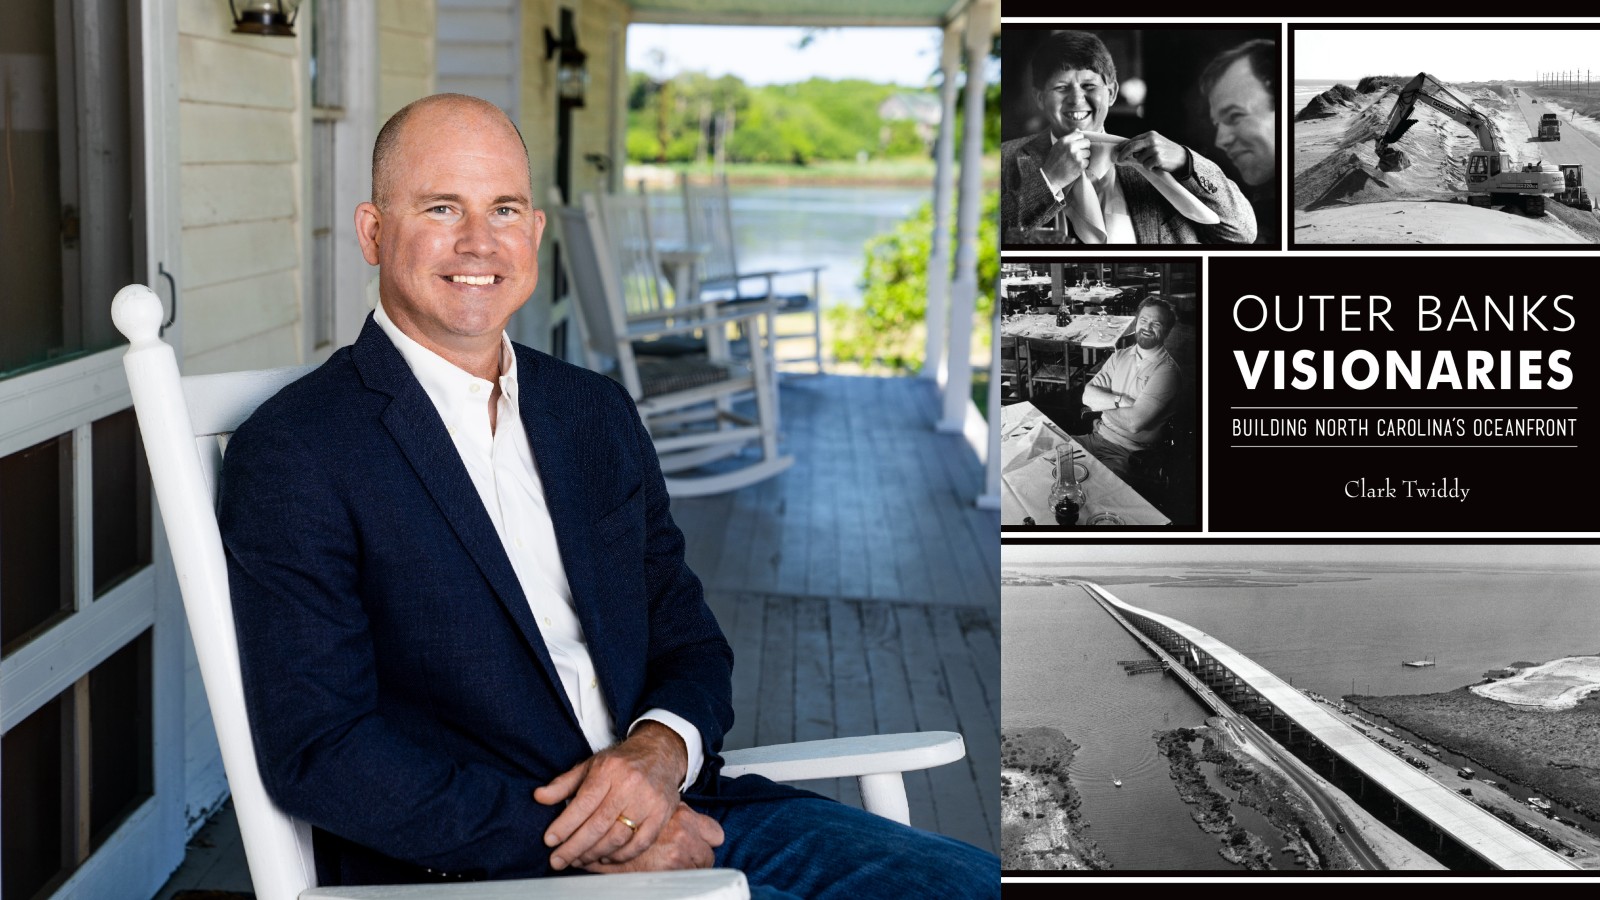 VIDEO: New book by Clark Twiddy features the visionaries that built the Outer Banks